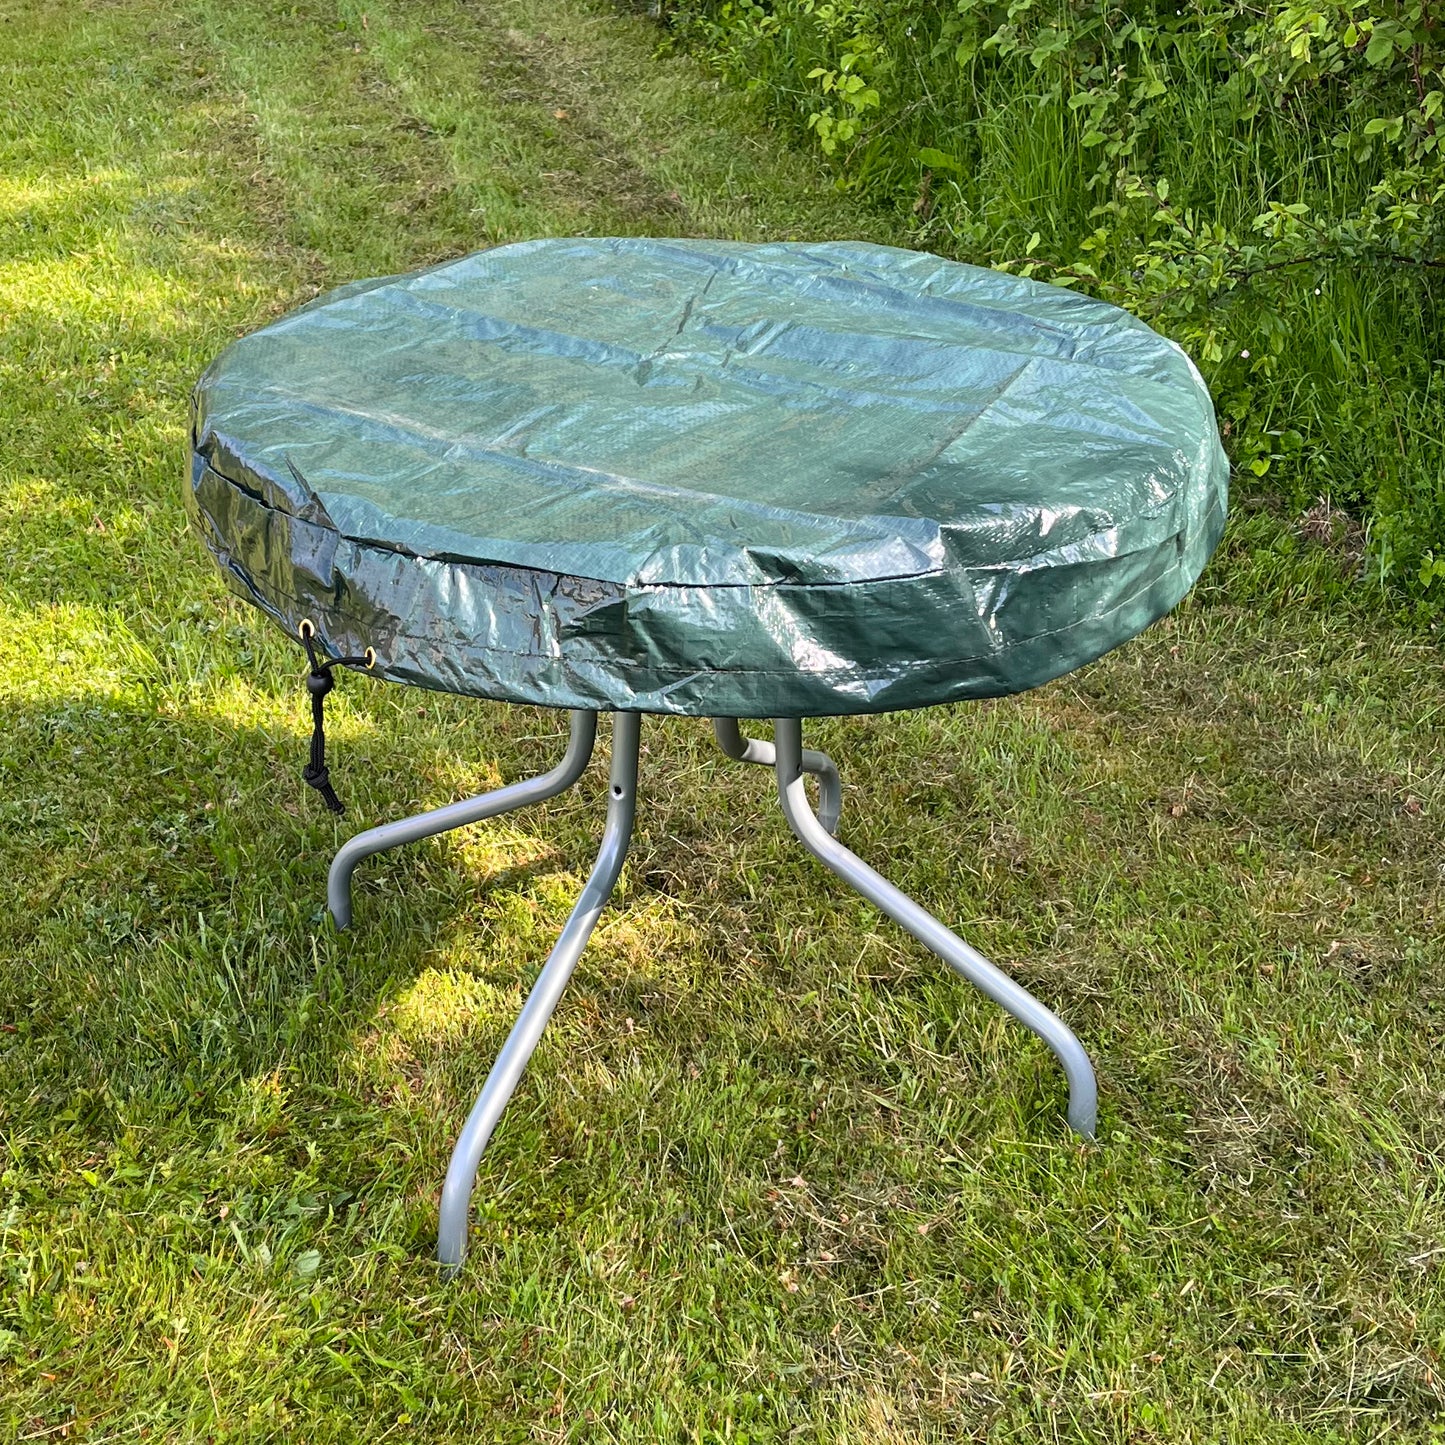 Waterproof Round Table Top Garden Furniture Cover (85cm)